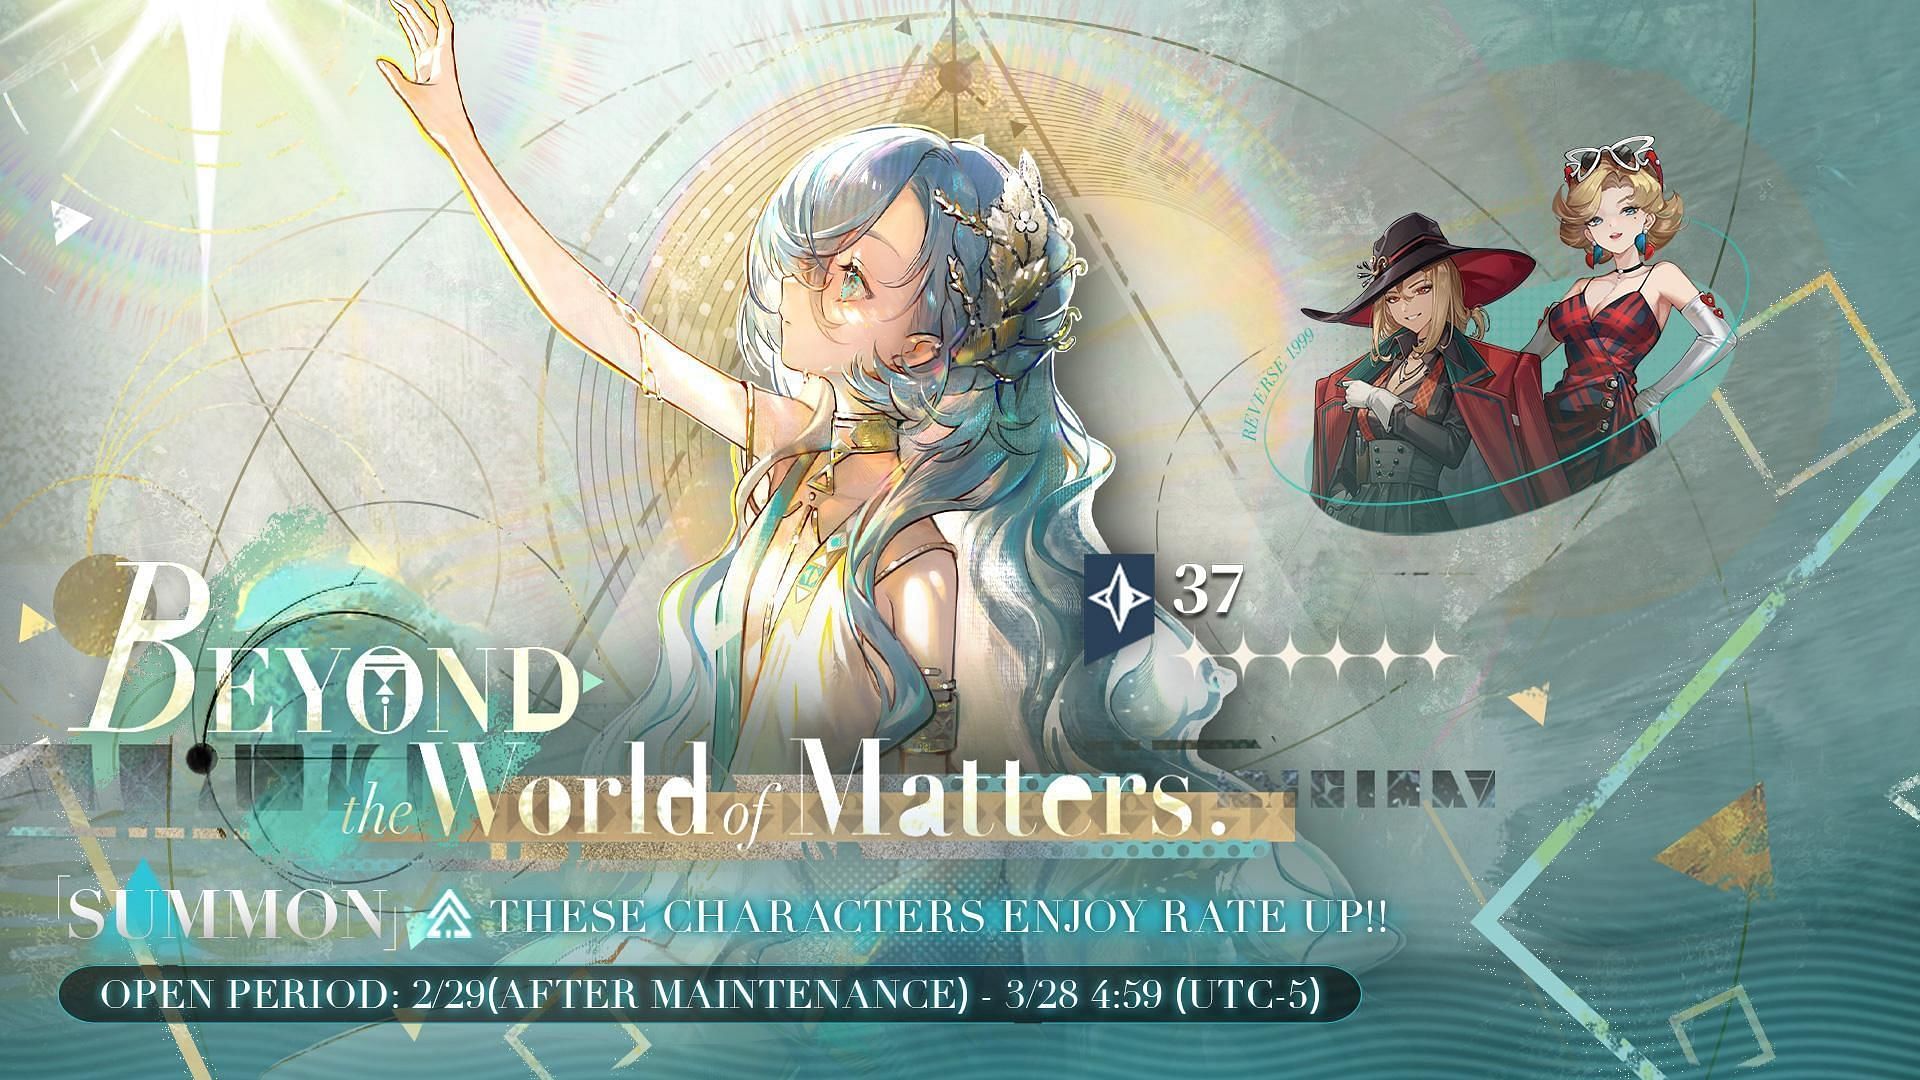 Beyond the World of Matters will be available until March 28, 2024. (Image via Bluepoch)